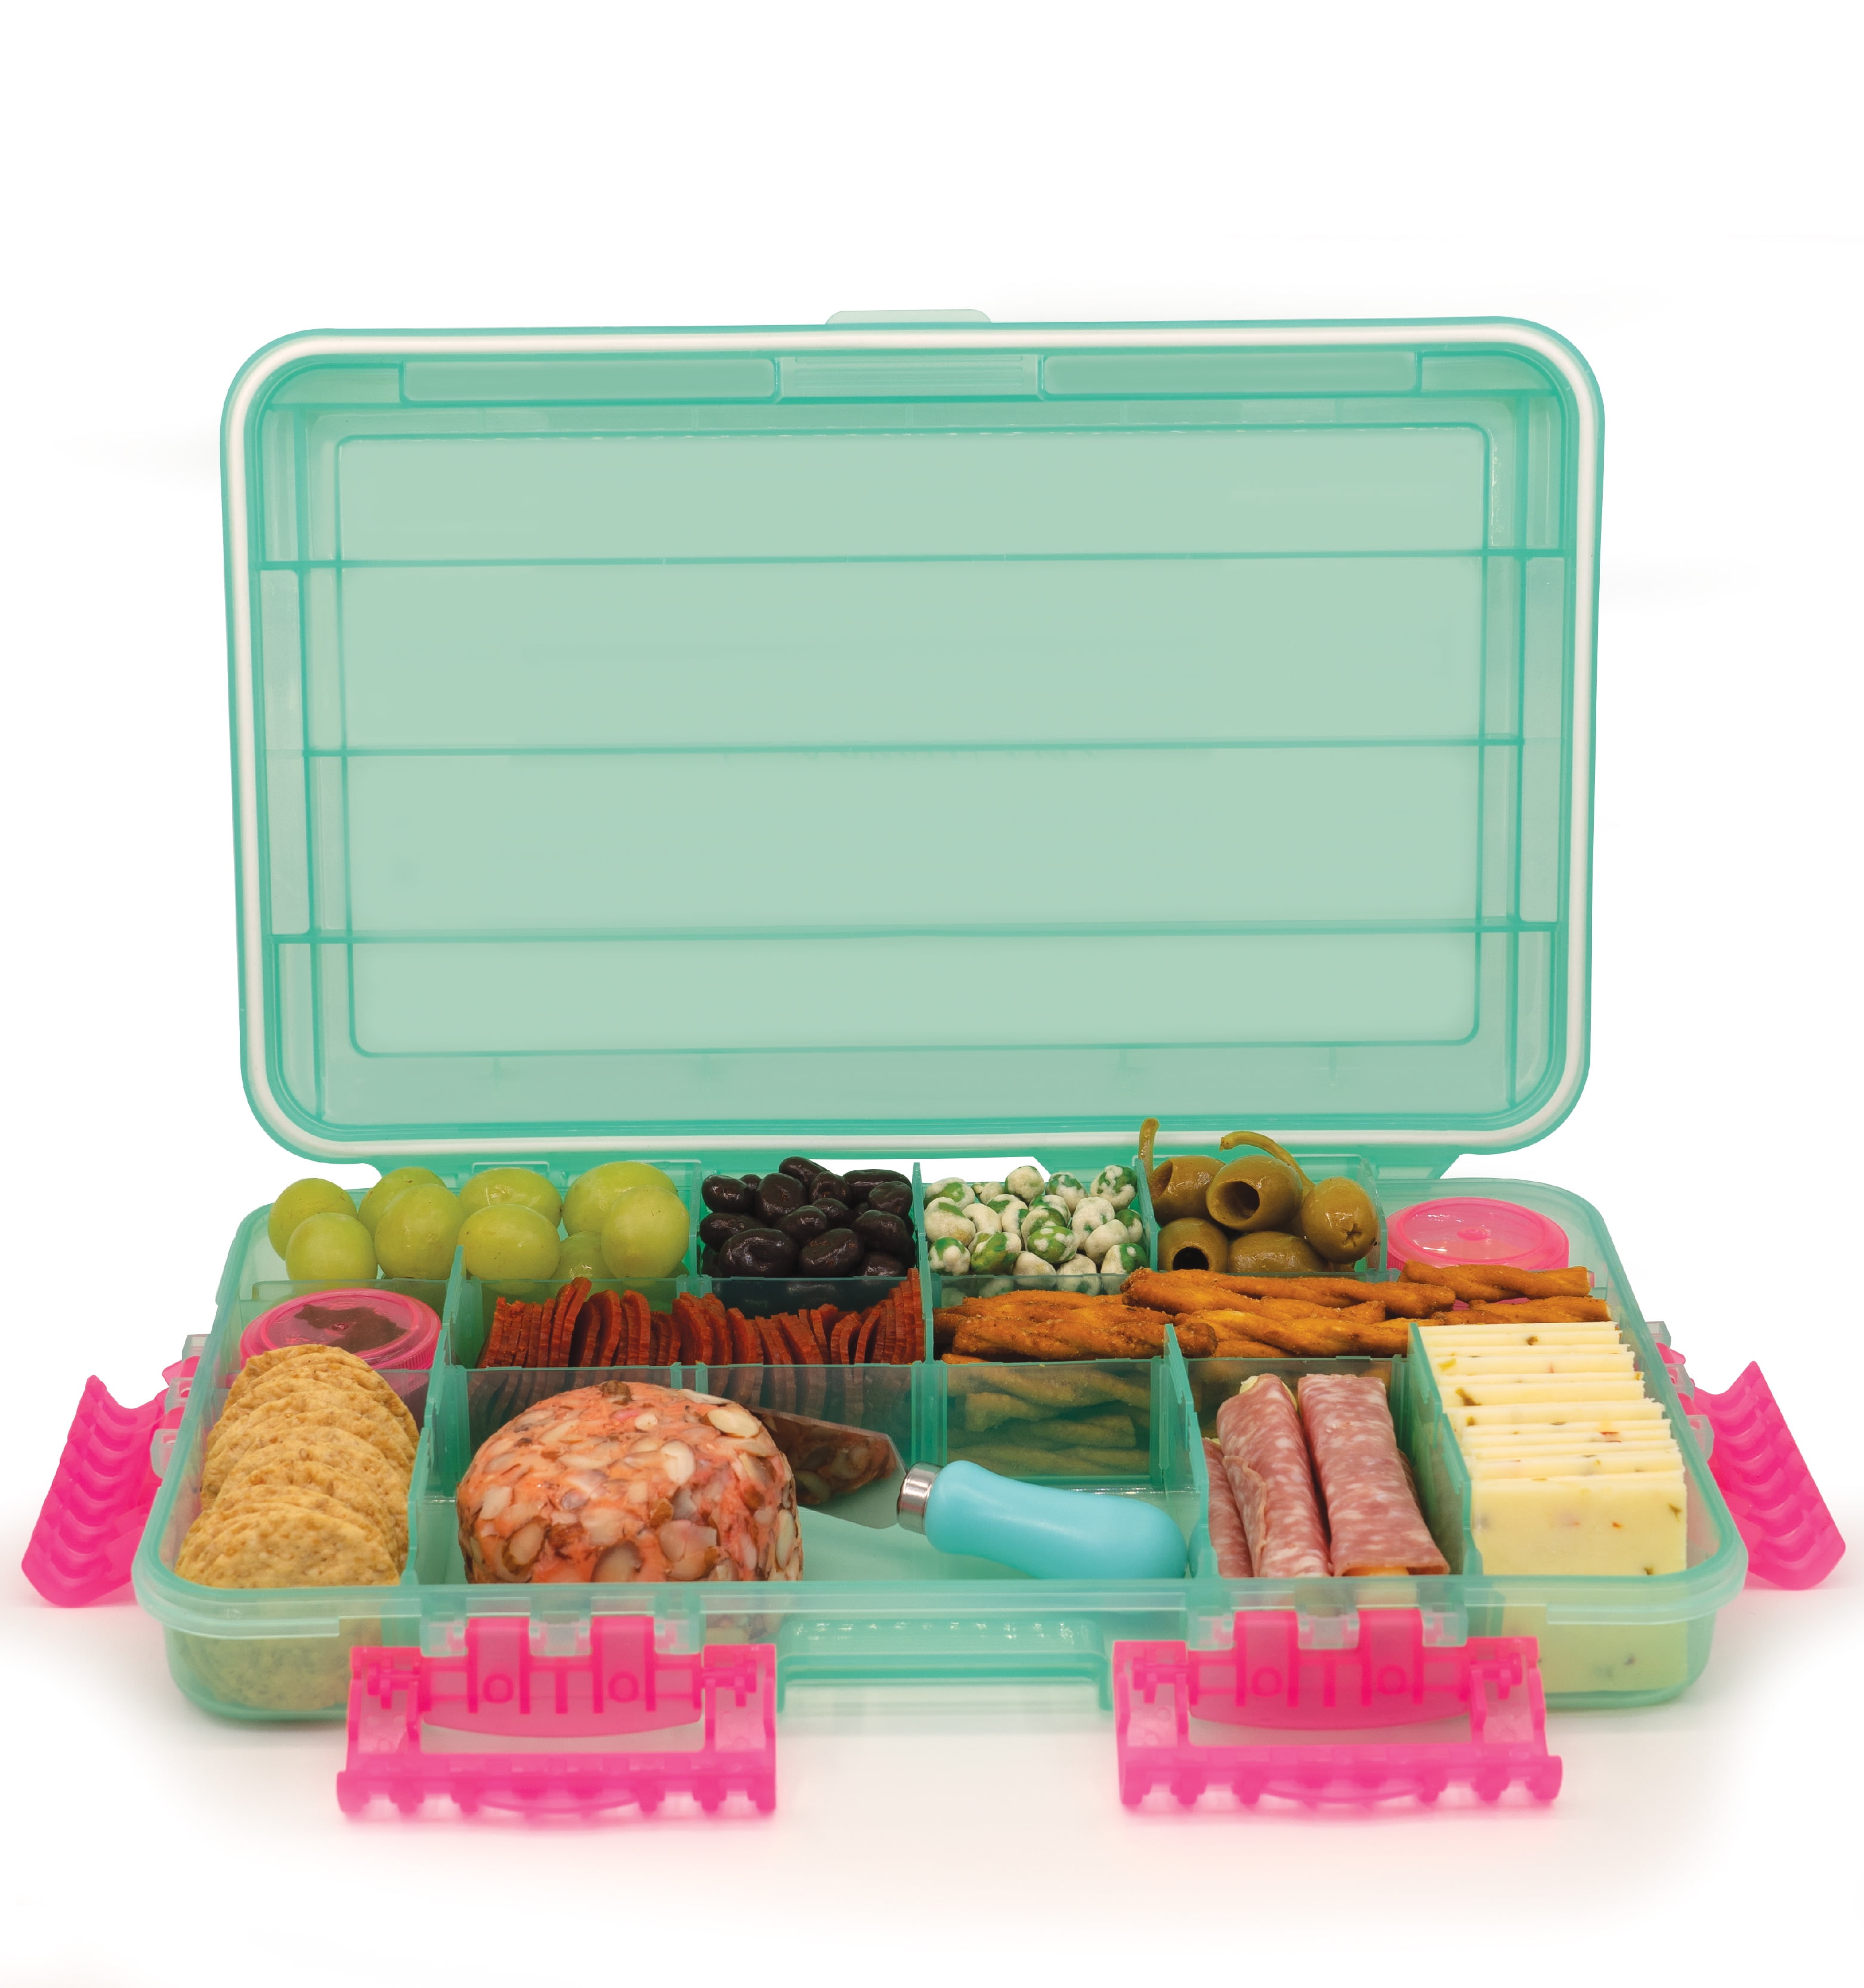 Charcuterie Safe By SubSafe - Waterproof Tackle Box Container Keeps Snacks  Fresh & Dry On the Go - Fill With Cured Meats, Cheese, Nuts -Perfect for  the Boat, Beach, Parties, Tailgating 